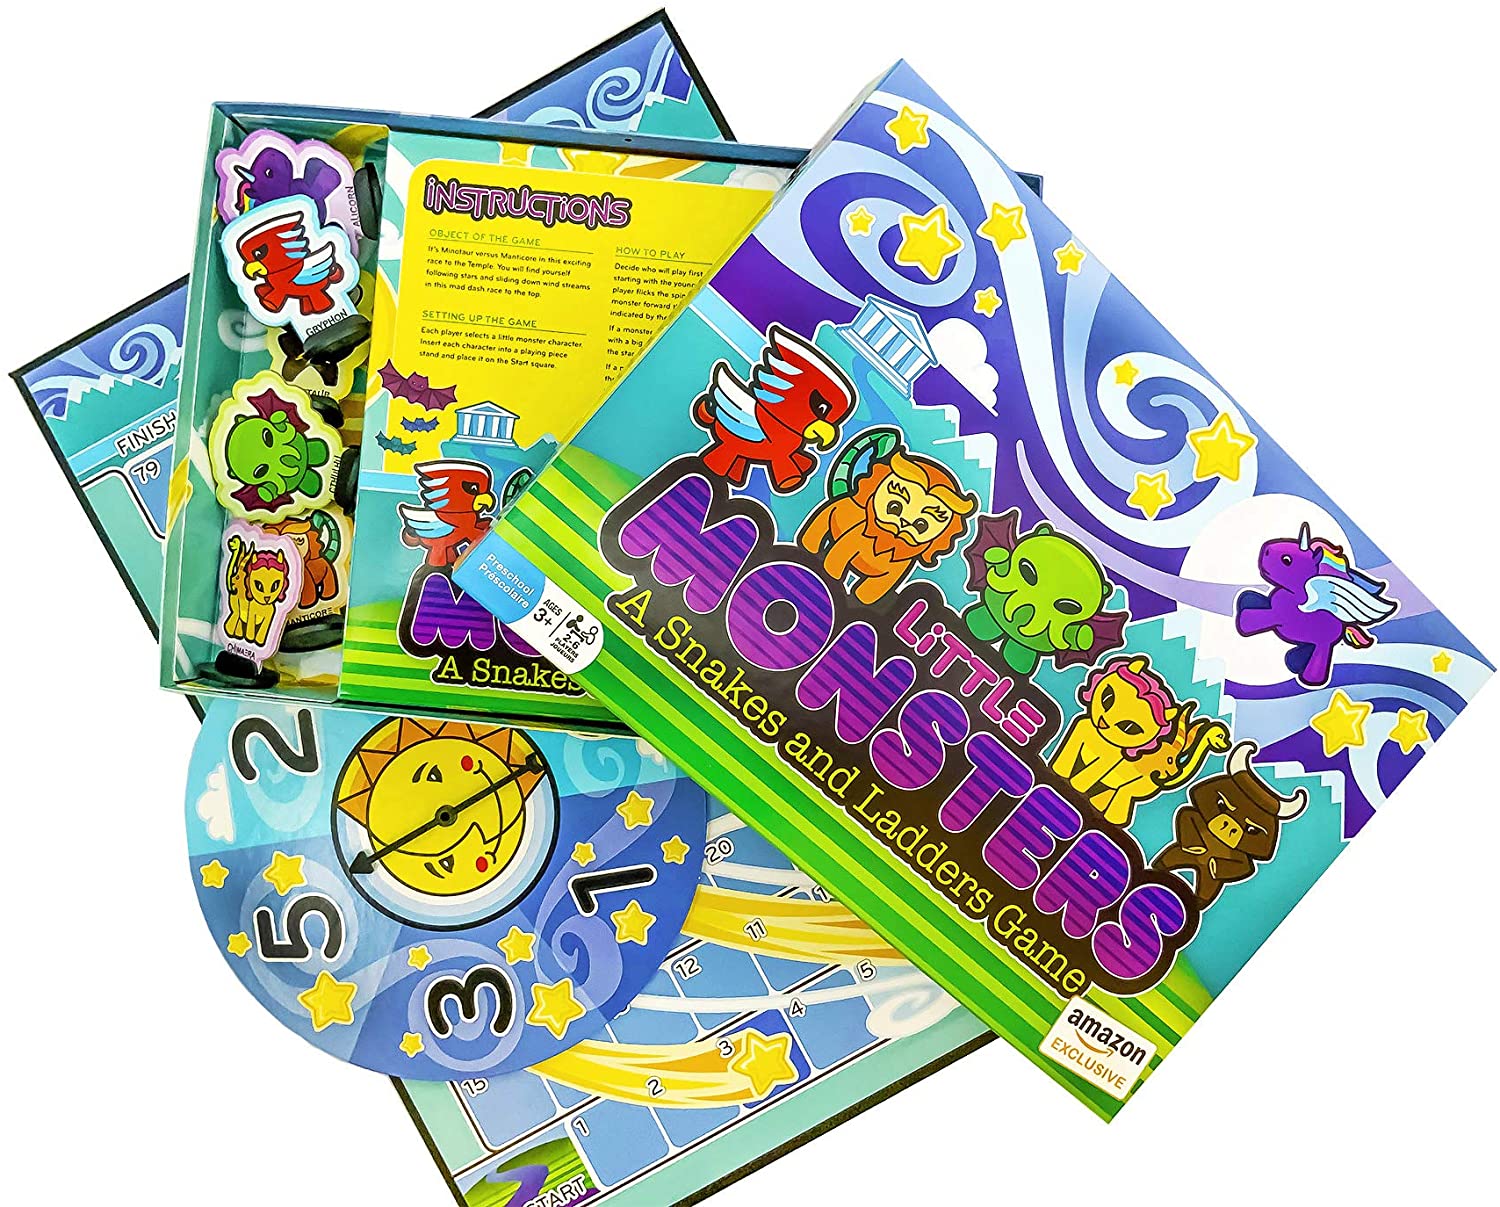 Outset Media Little Monsters Snakes and Ladders Board Game $5.51 + Free Shipping w/ Prime or on $25+